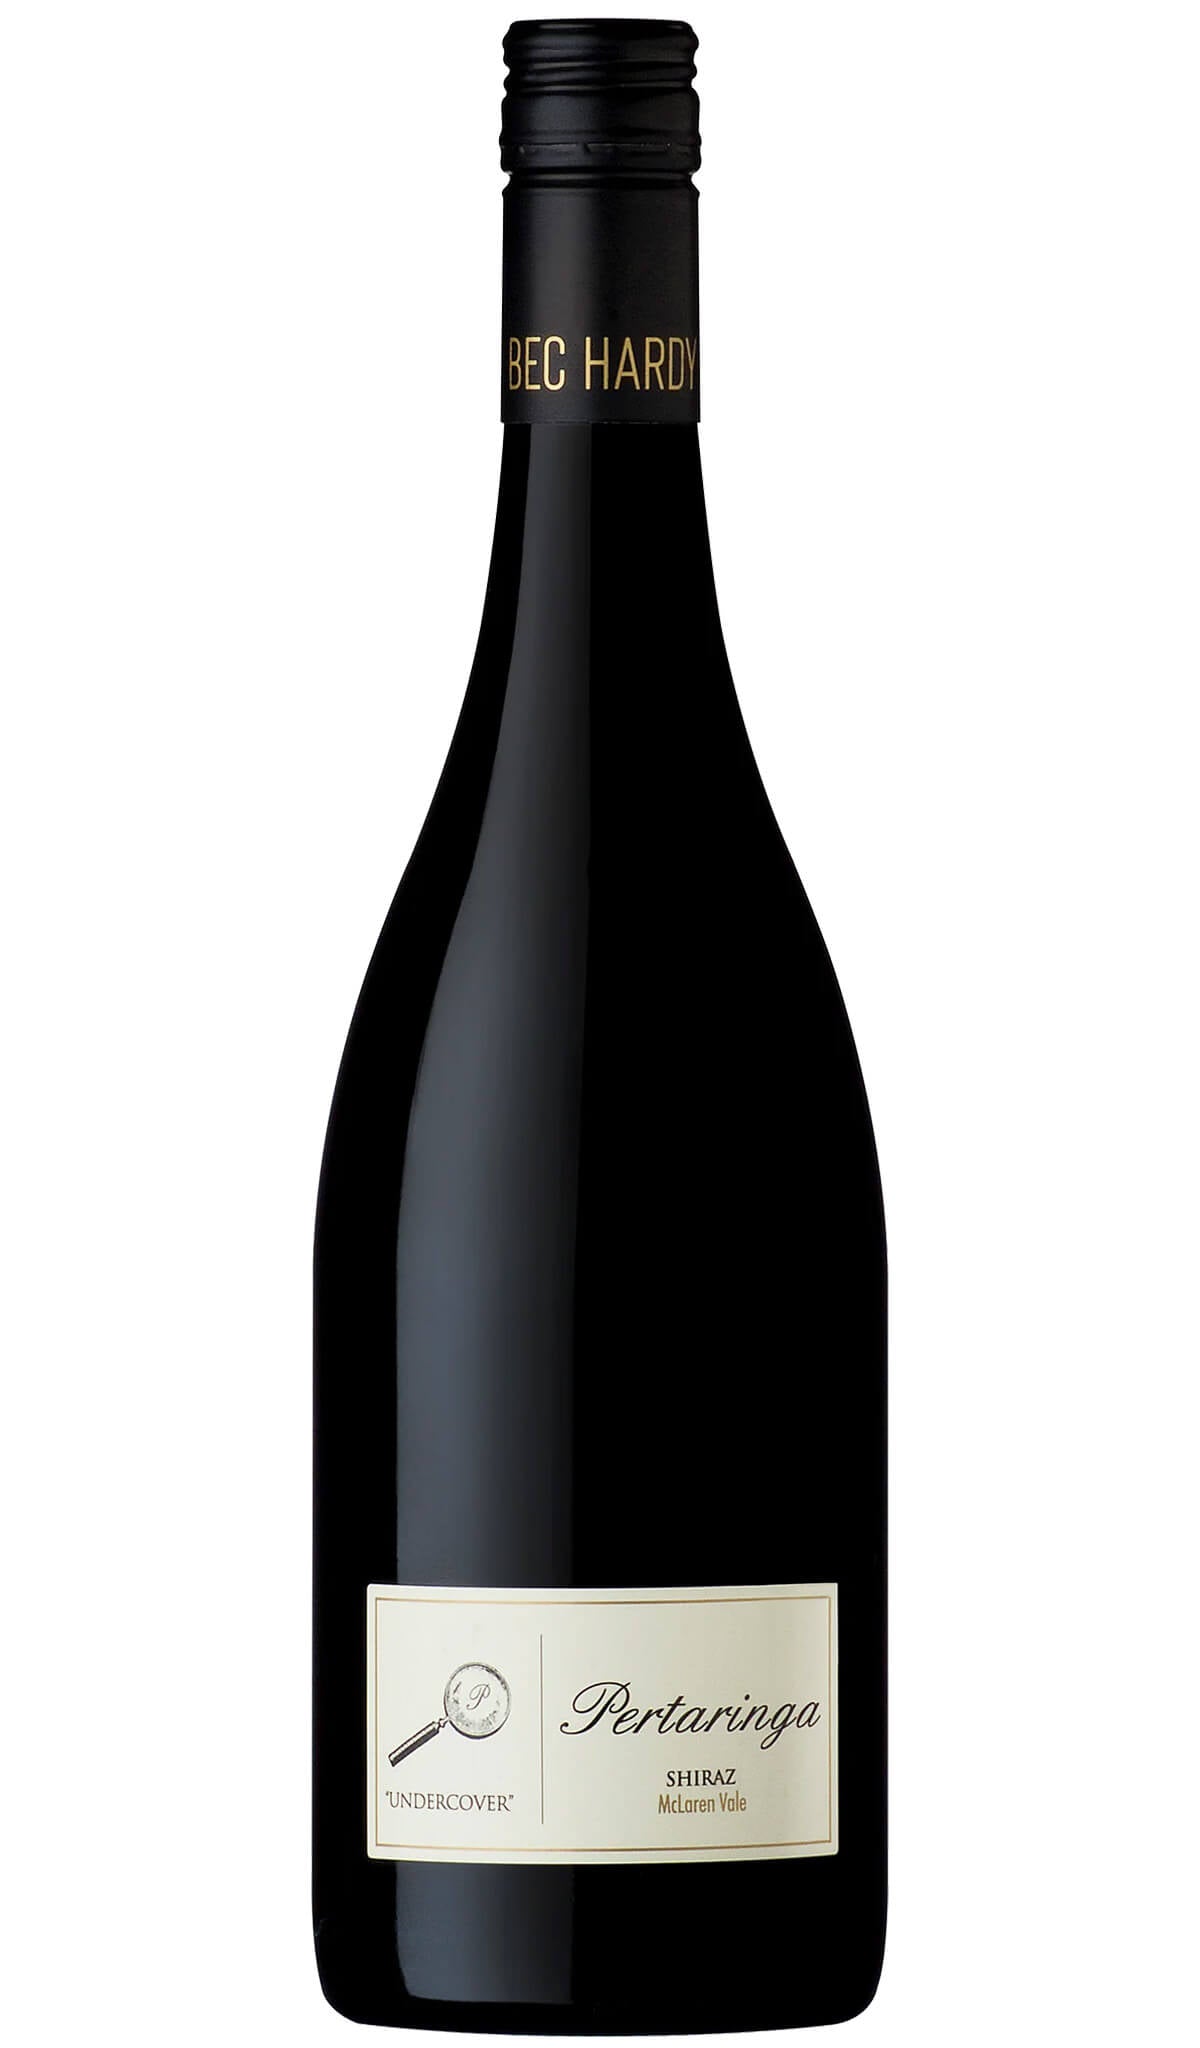 Find out more or buy Bec Hardy Pertaringa 'Undercover' Shiraz 2022 (McLaren Vale) online at Wine Sellers Direct - Australia’s independent liquor specialists.